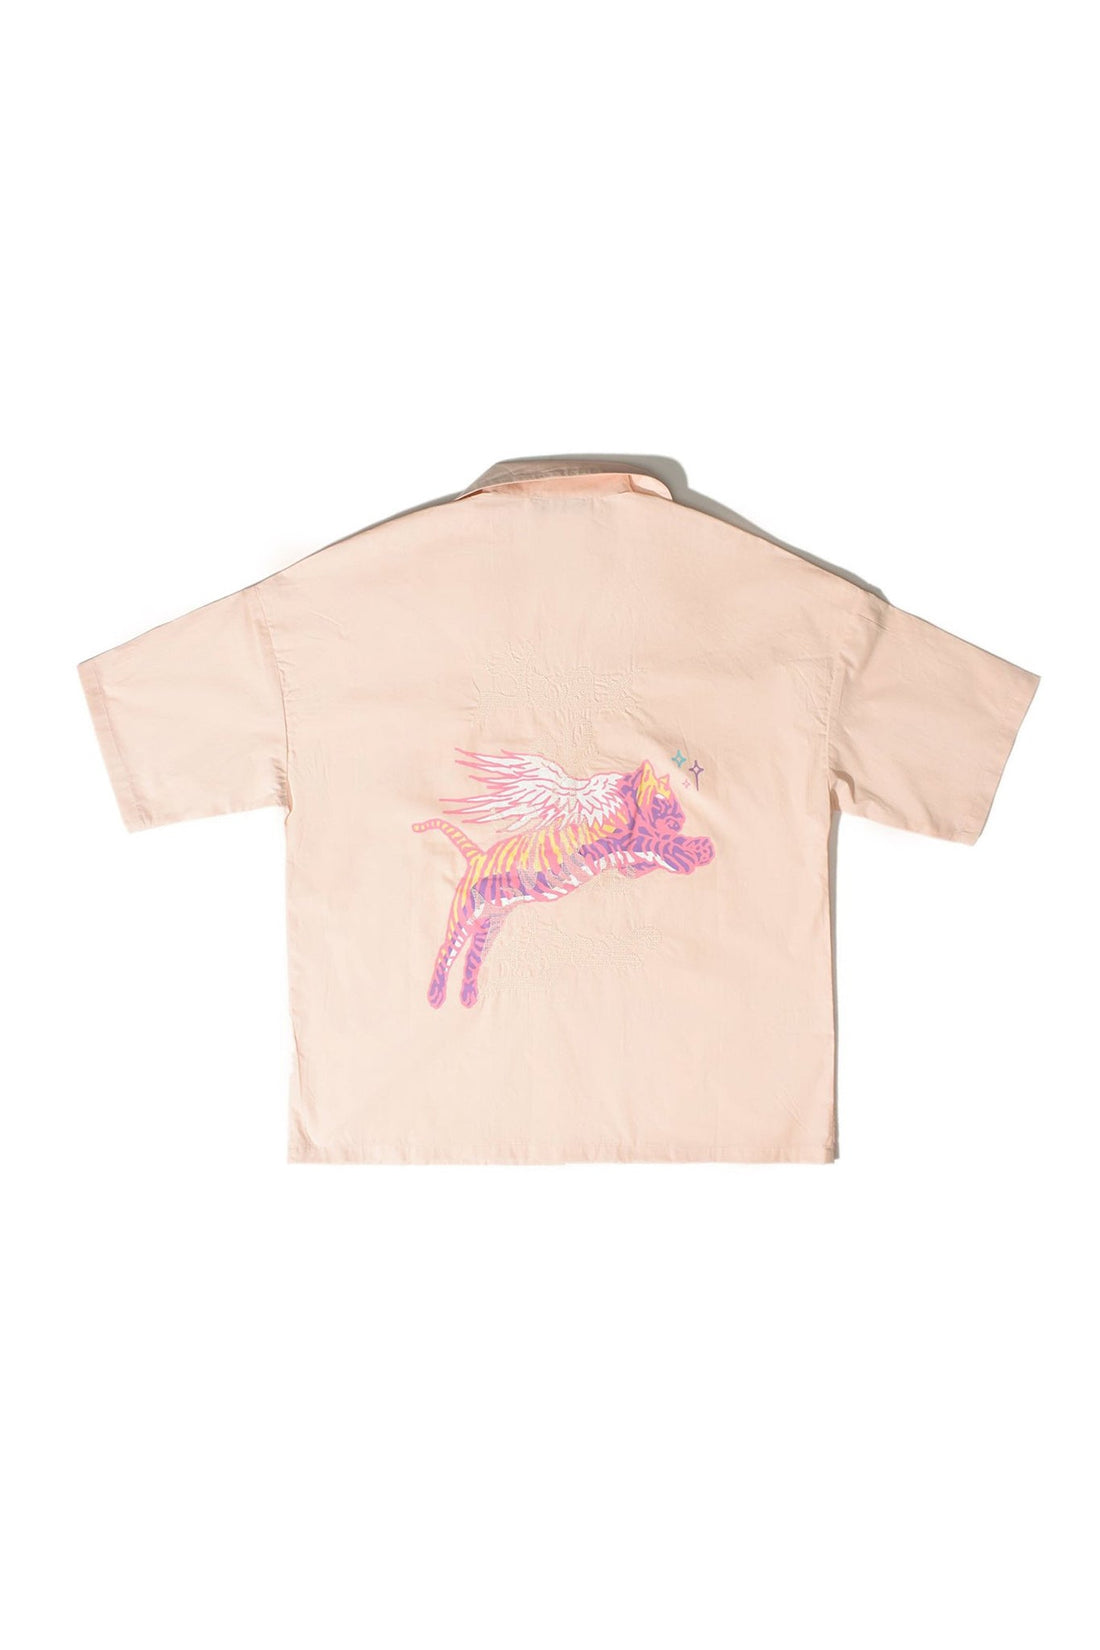 TIGER SHIRT LIGHT PINK Acupuncture